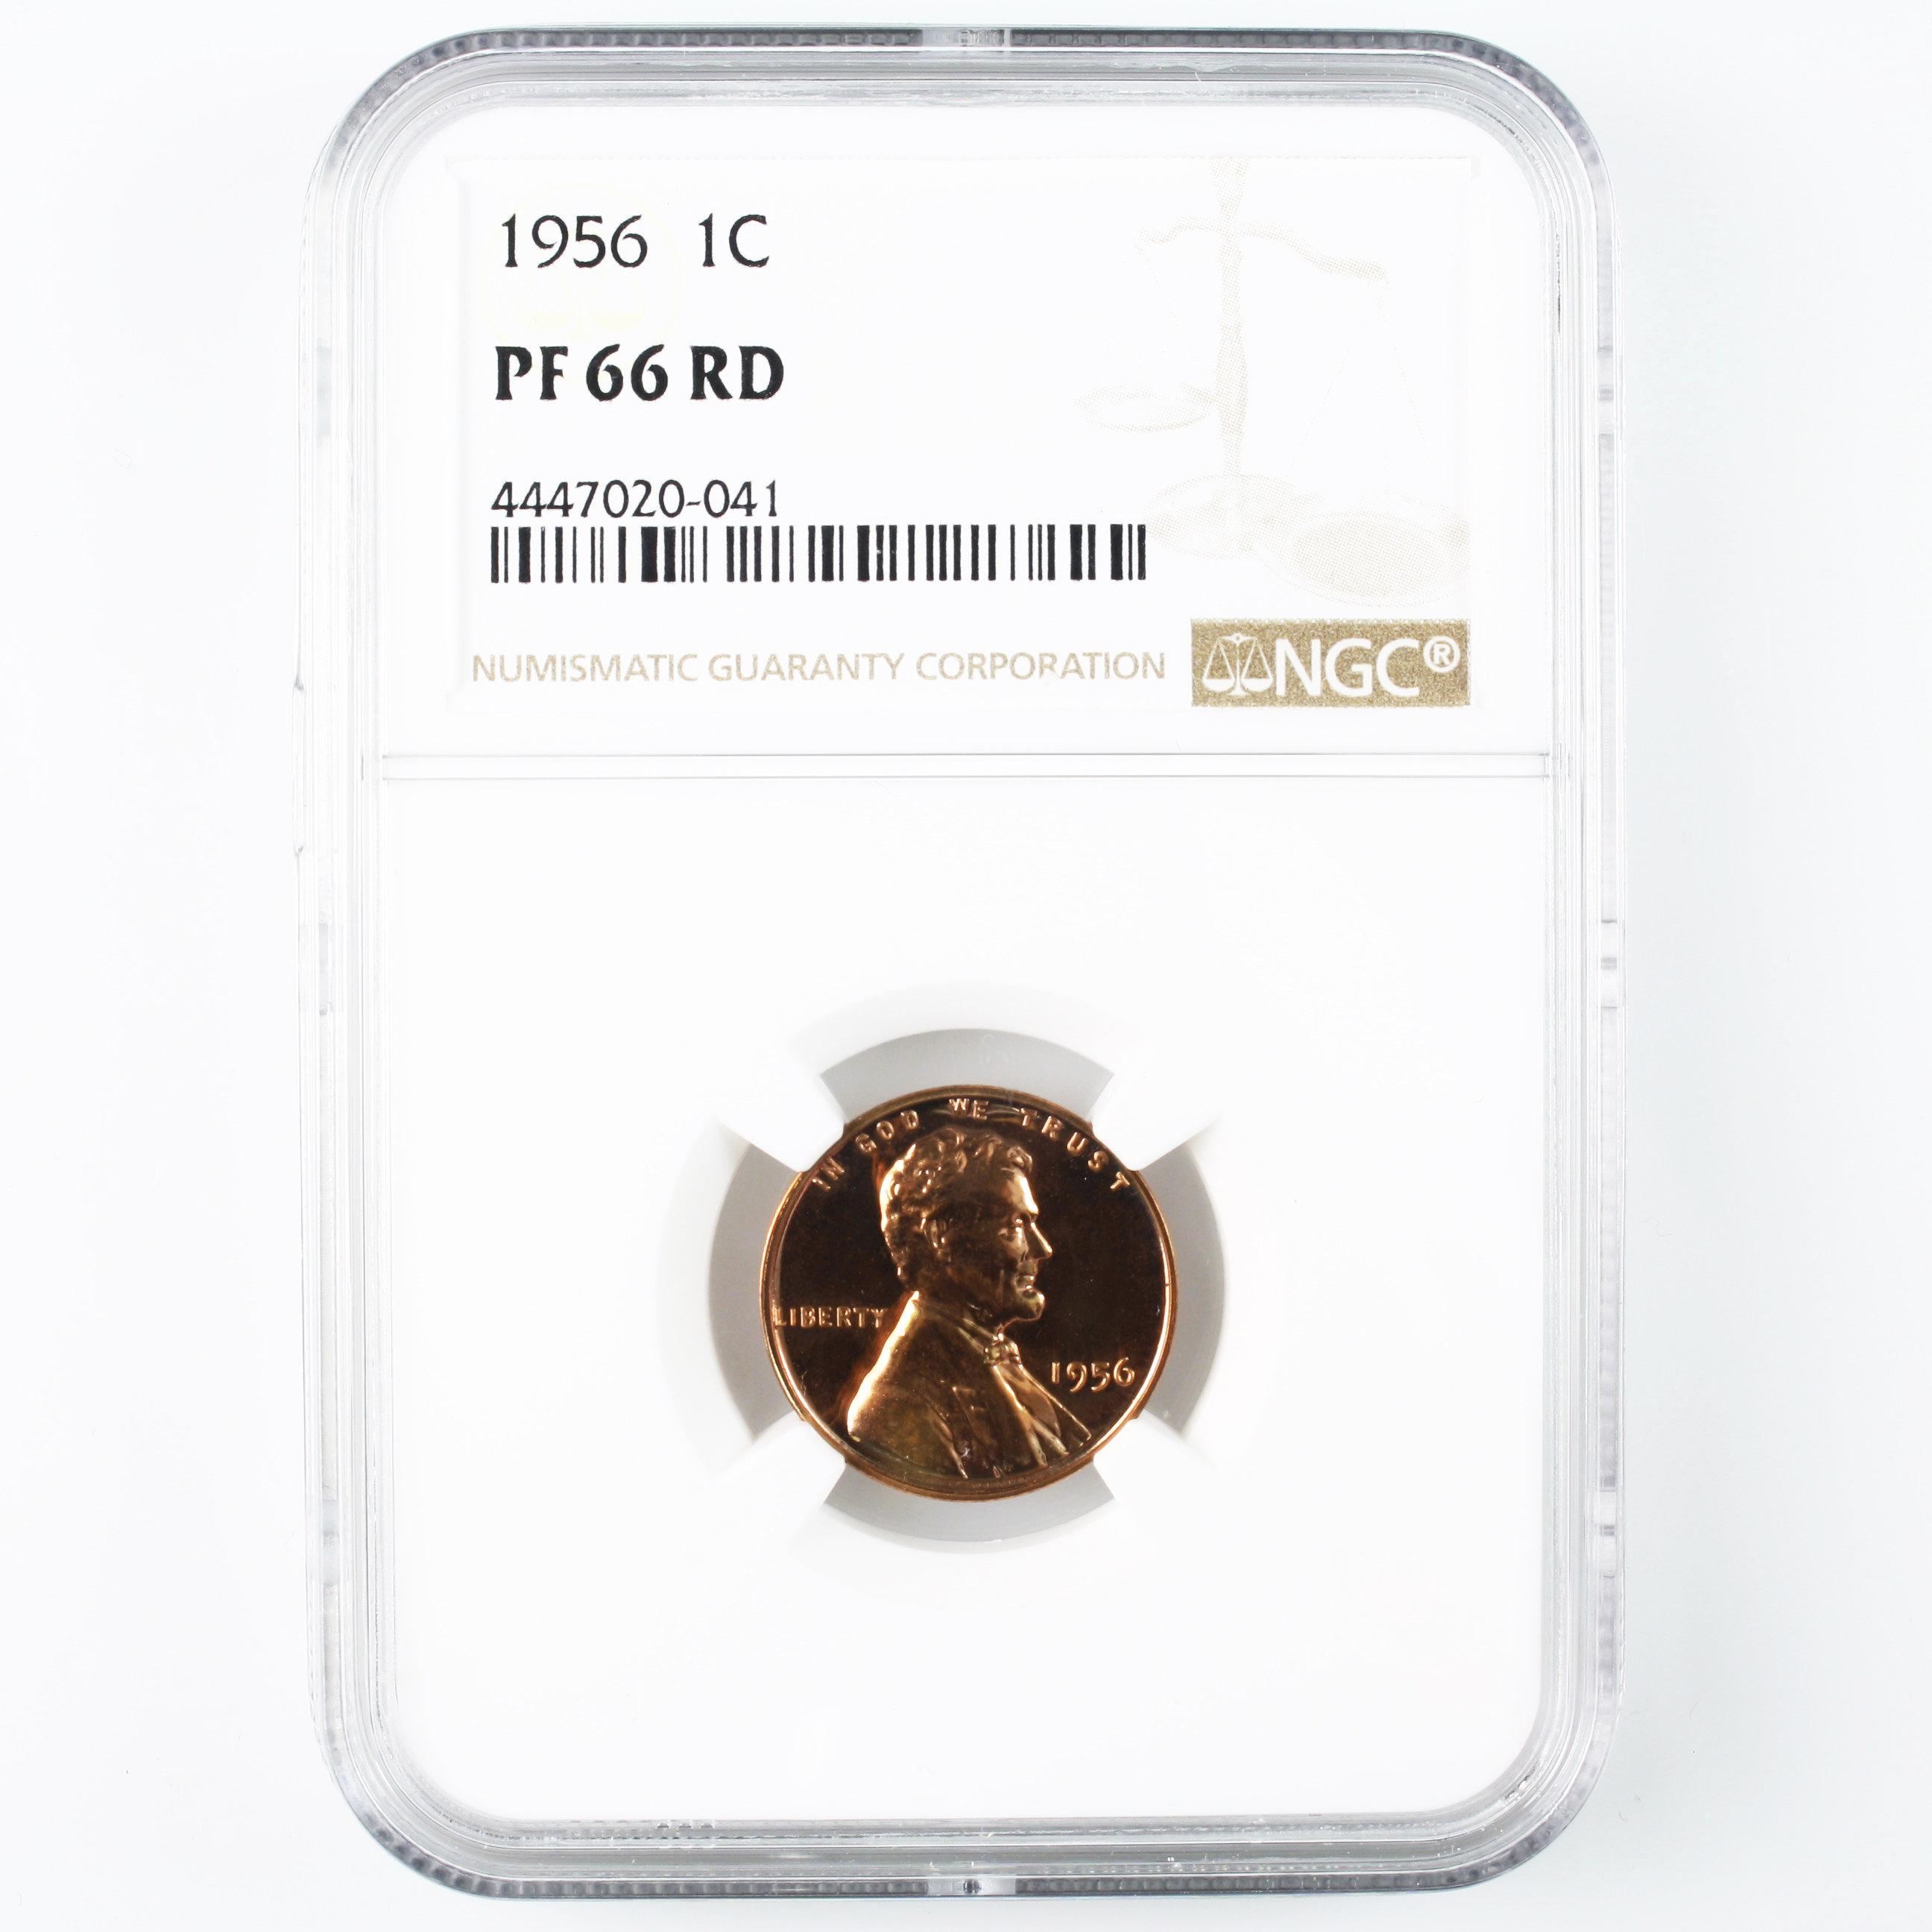 Certified 1956 U.S. proof Lincoln cent